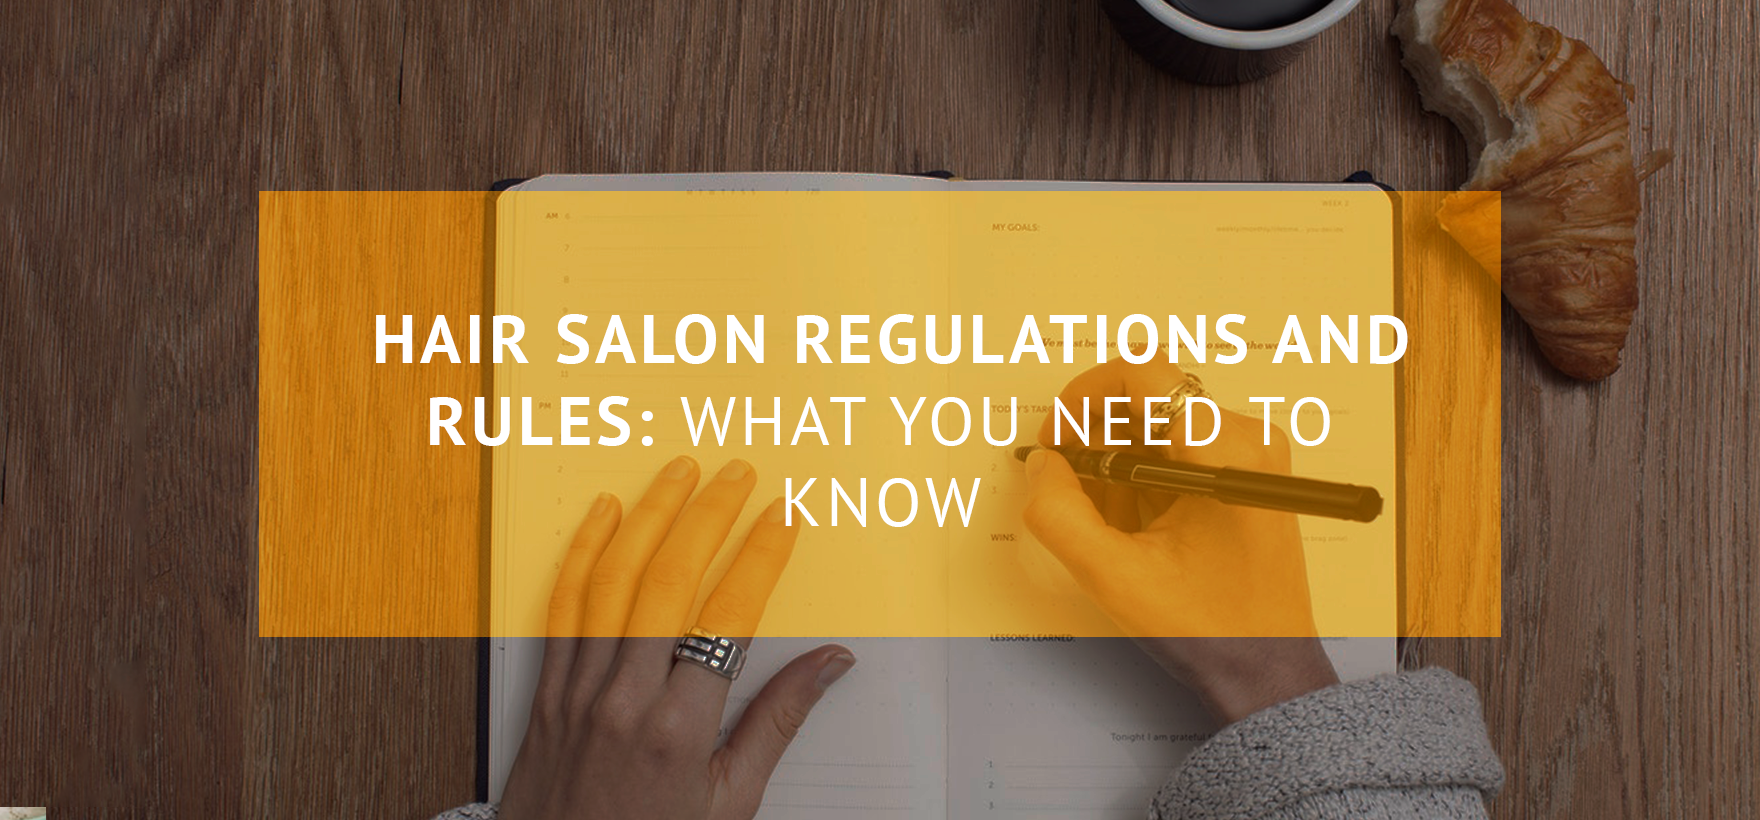 Hair Salon Regulations and Rules: What You Need to Know